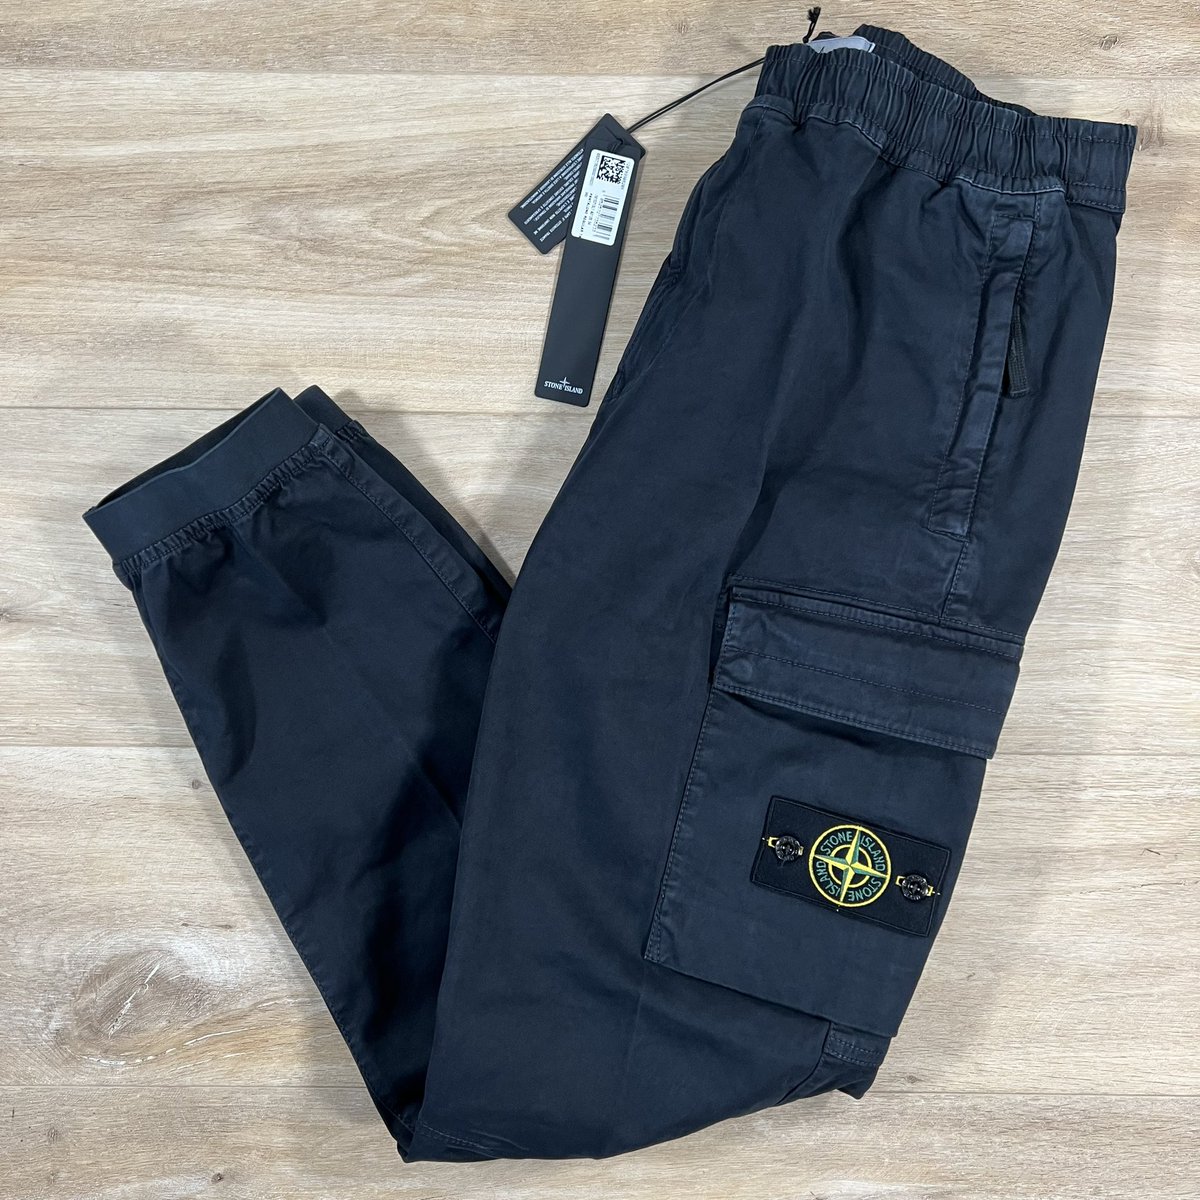 If Harry Kane scores the first goal vs Ukraine, we’ll giveaway a pair of Stone Island cargo pants in a size of your choice worth £425! 🏴󠁧󠁢󠁥󠁮󠁧󠁿 Retweet & follow @LabelMenswear to enter